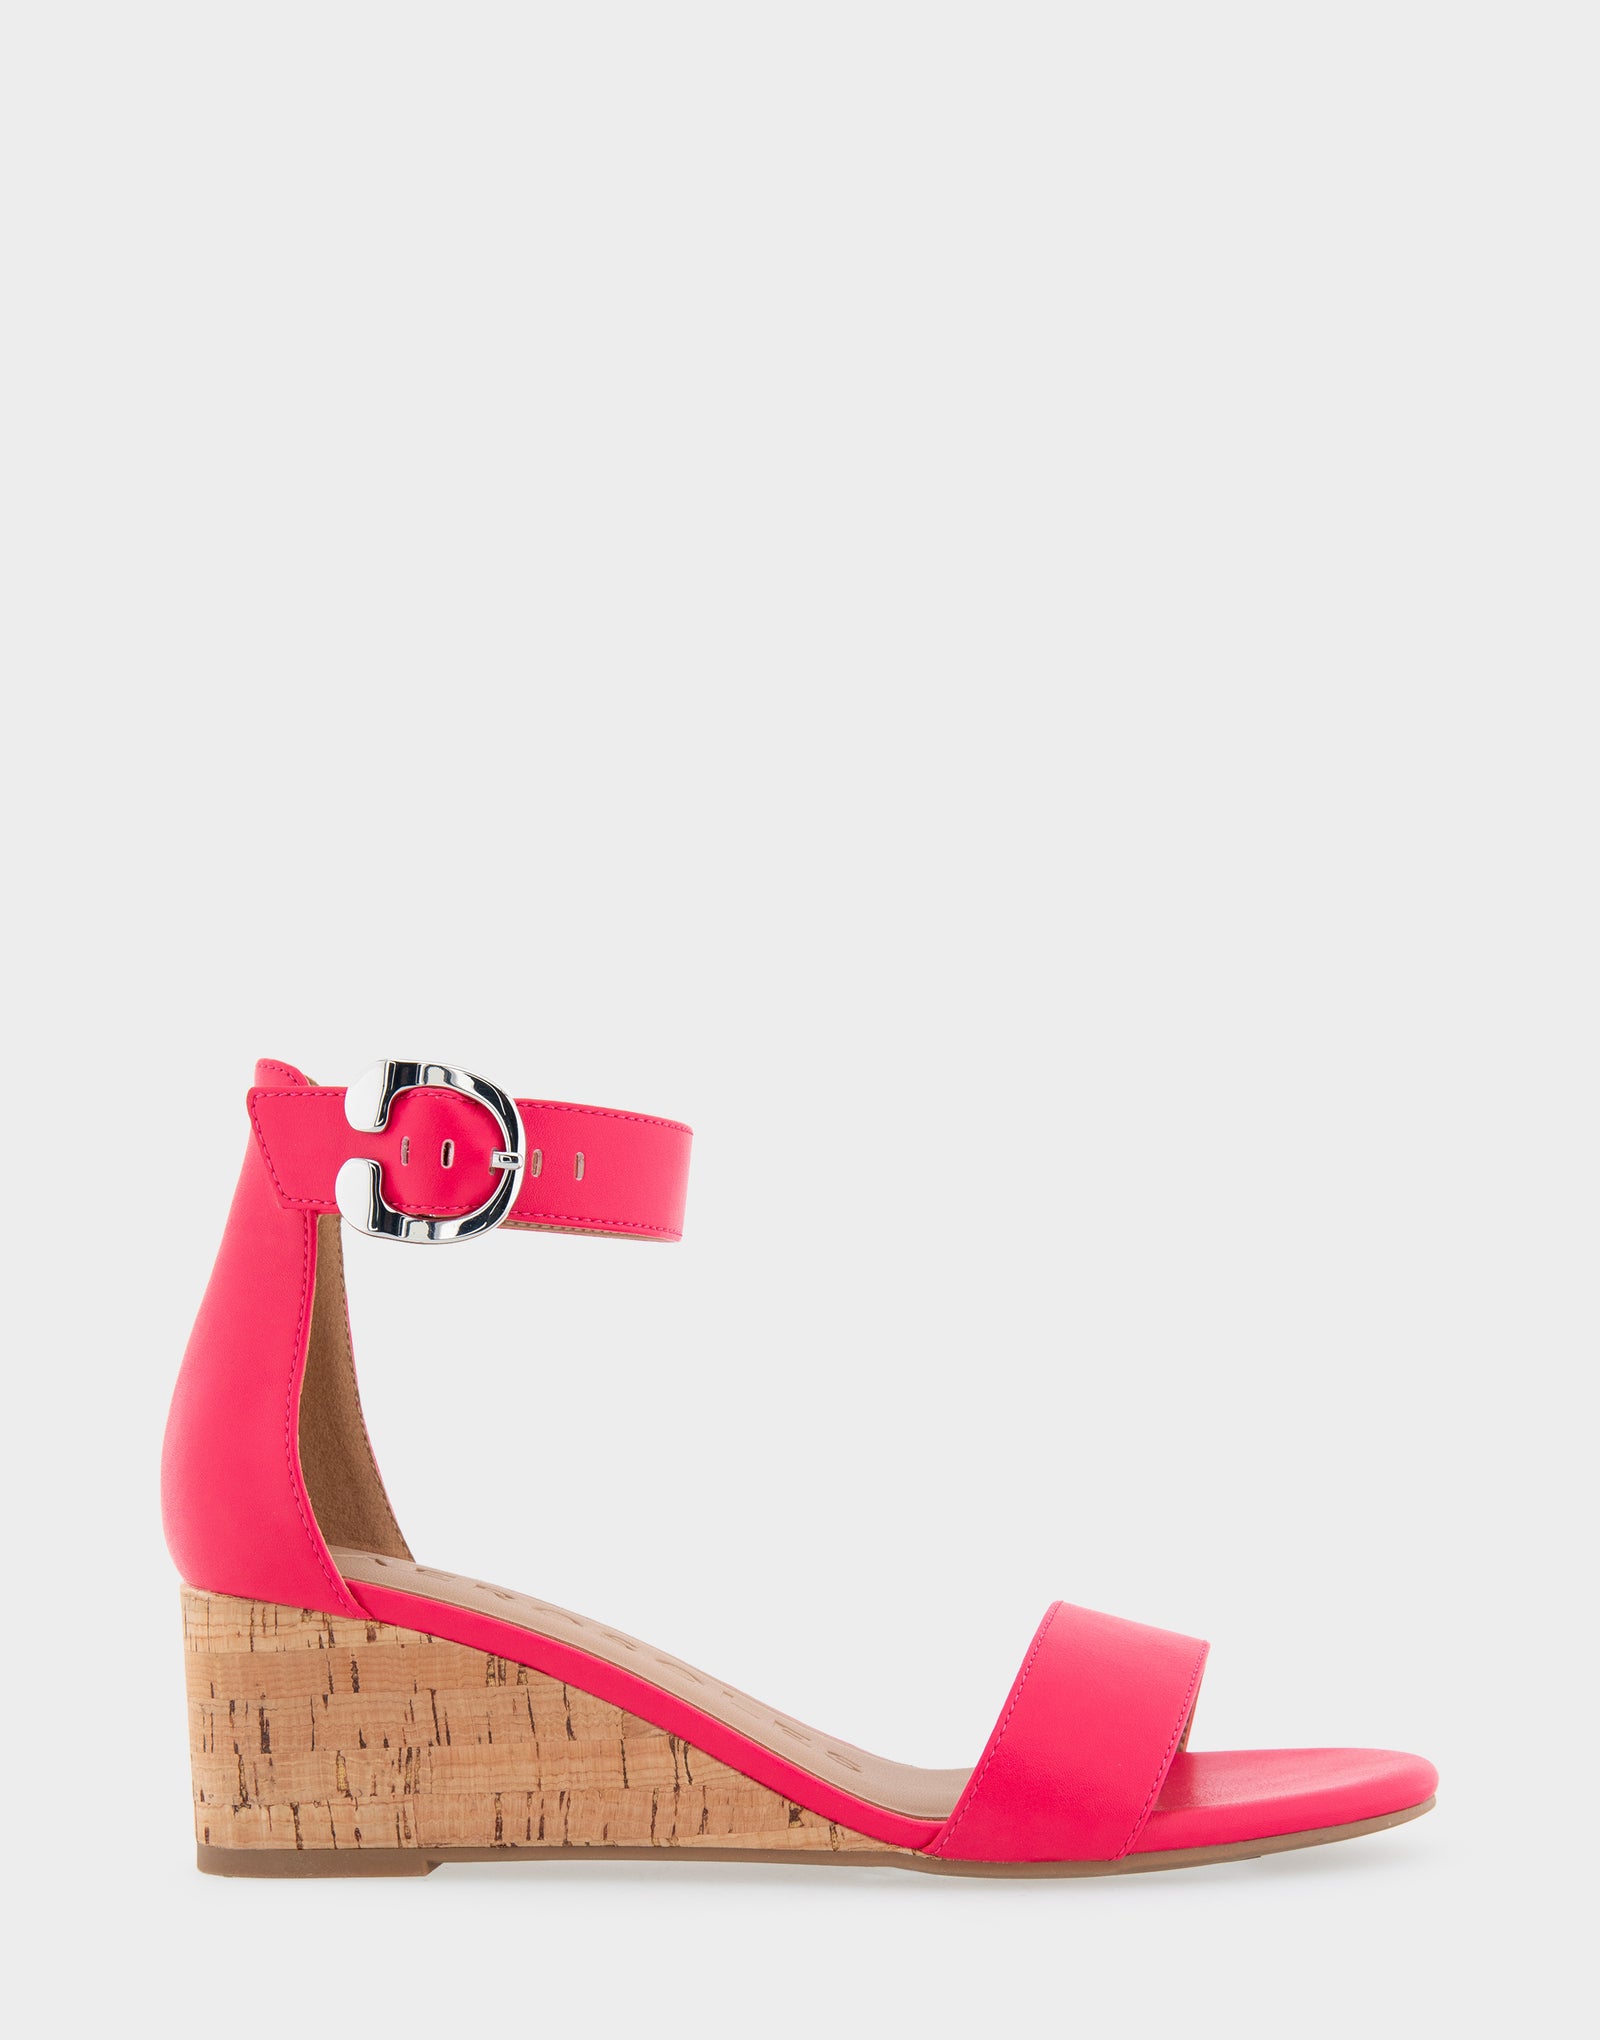 Women's Ankle Strap Mid Wedge Sandal in Virtual Pink Faux Leather